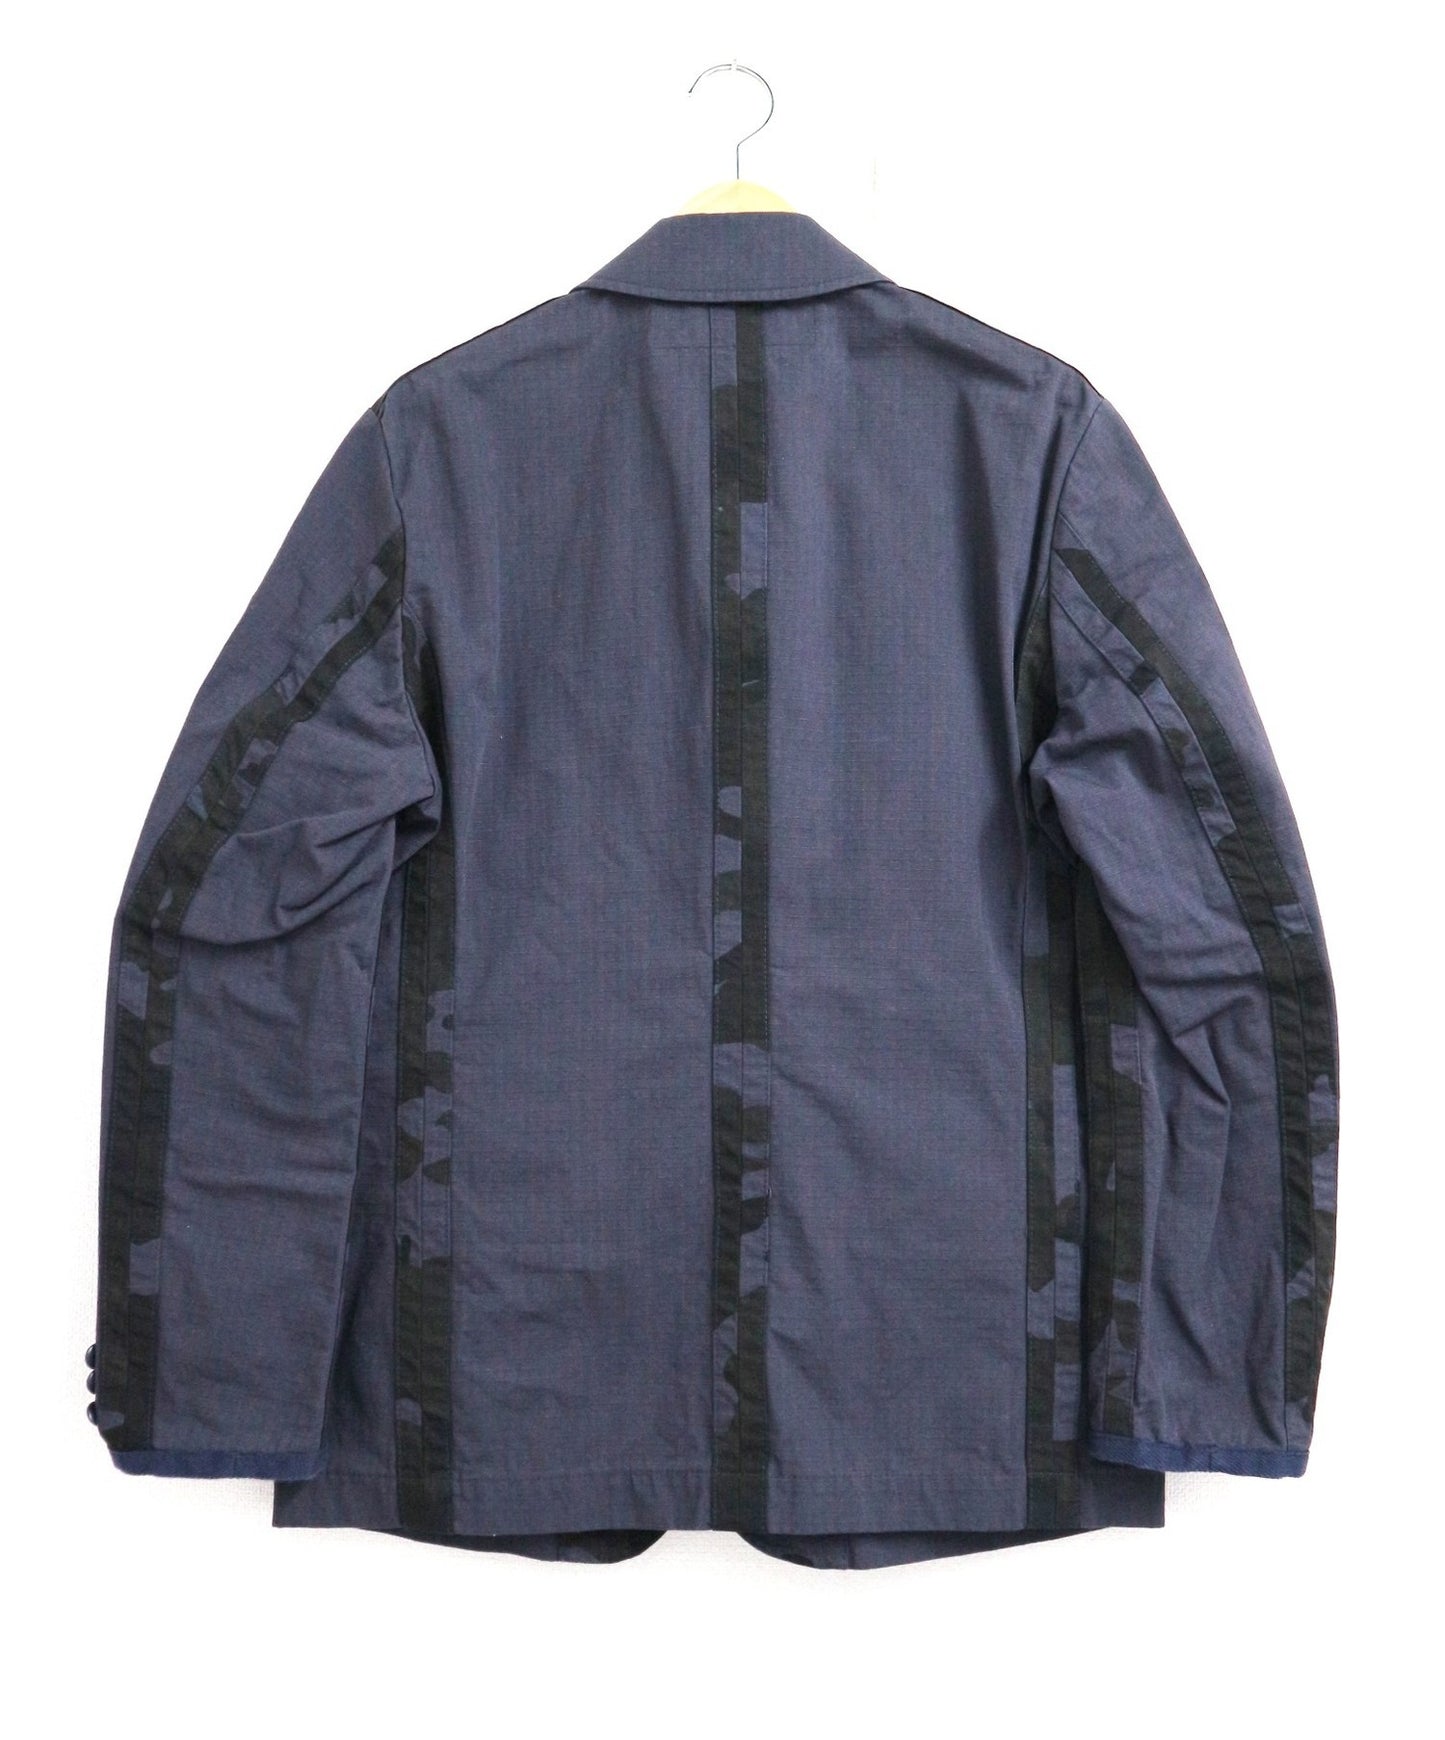 Comme des Garcons Homme Ripstop 위장 패턴 재킷 He-J018